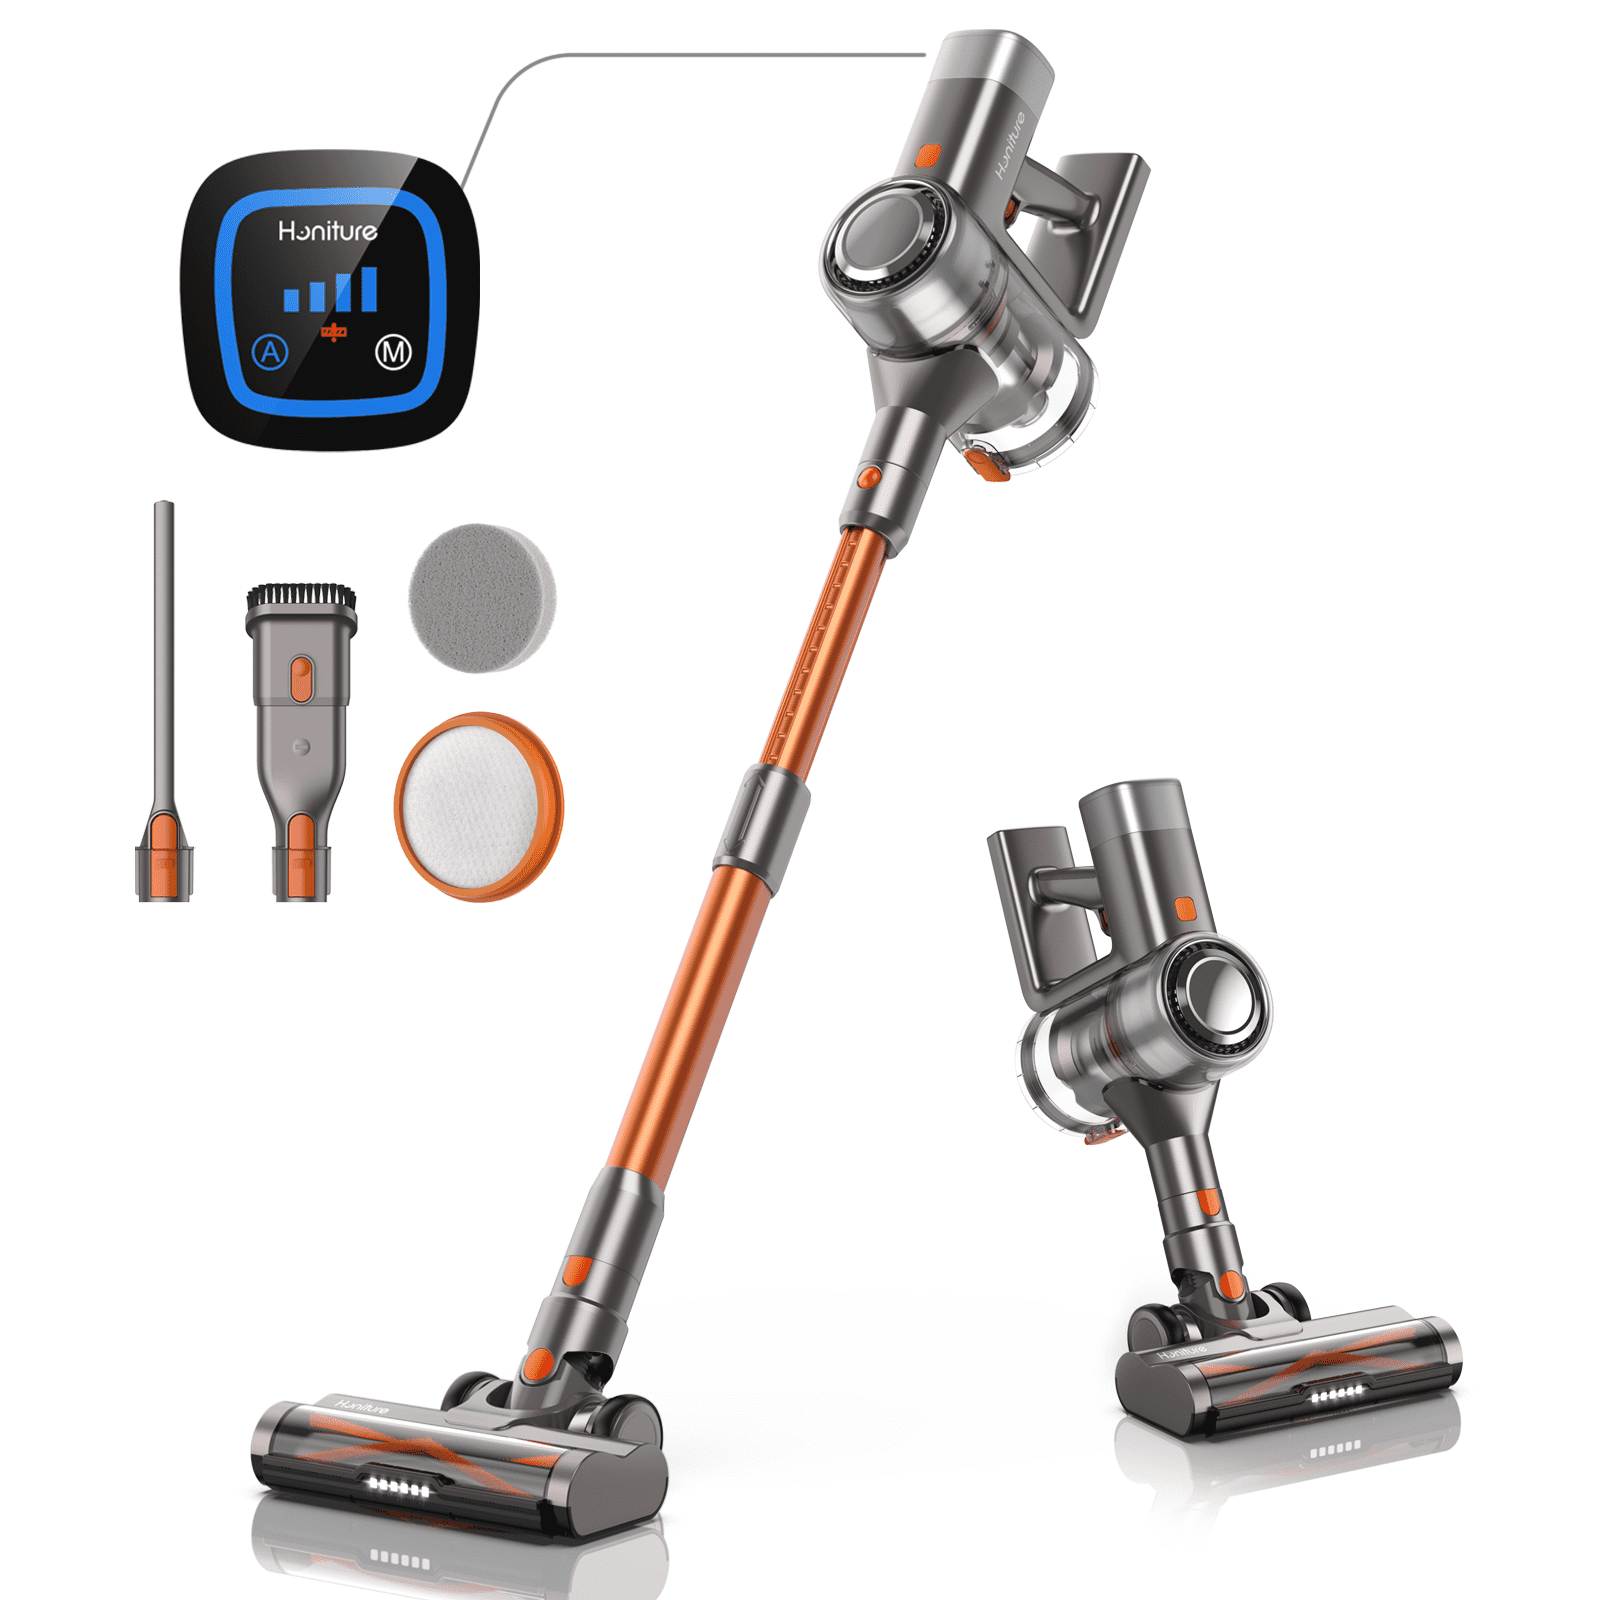 Vacuum Cleaner Docking Station - Wall Mount Compatible With Dyson V7 V8  Cordless Vacuum Cleaner - Walmart.com